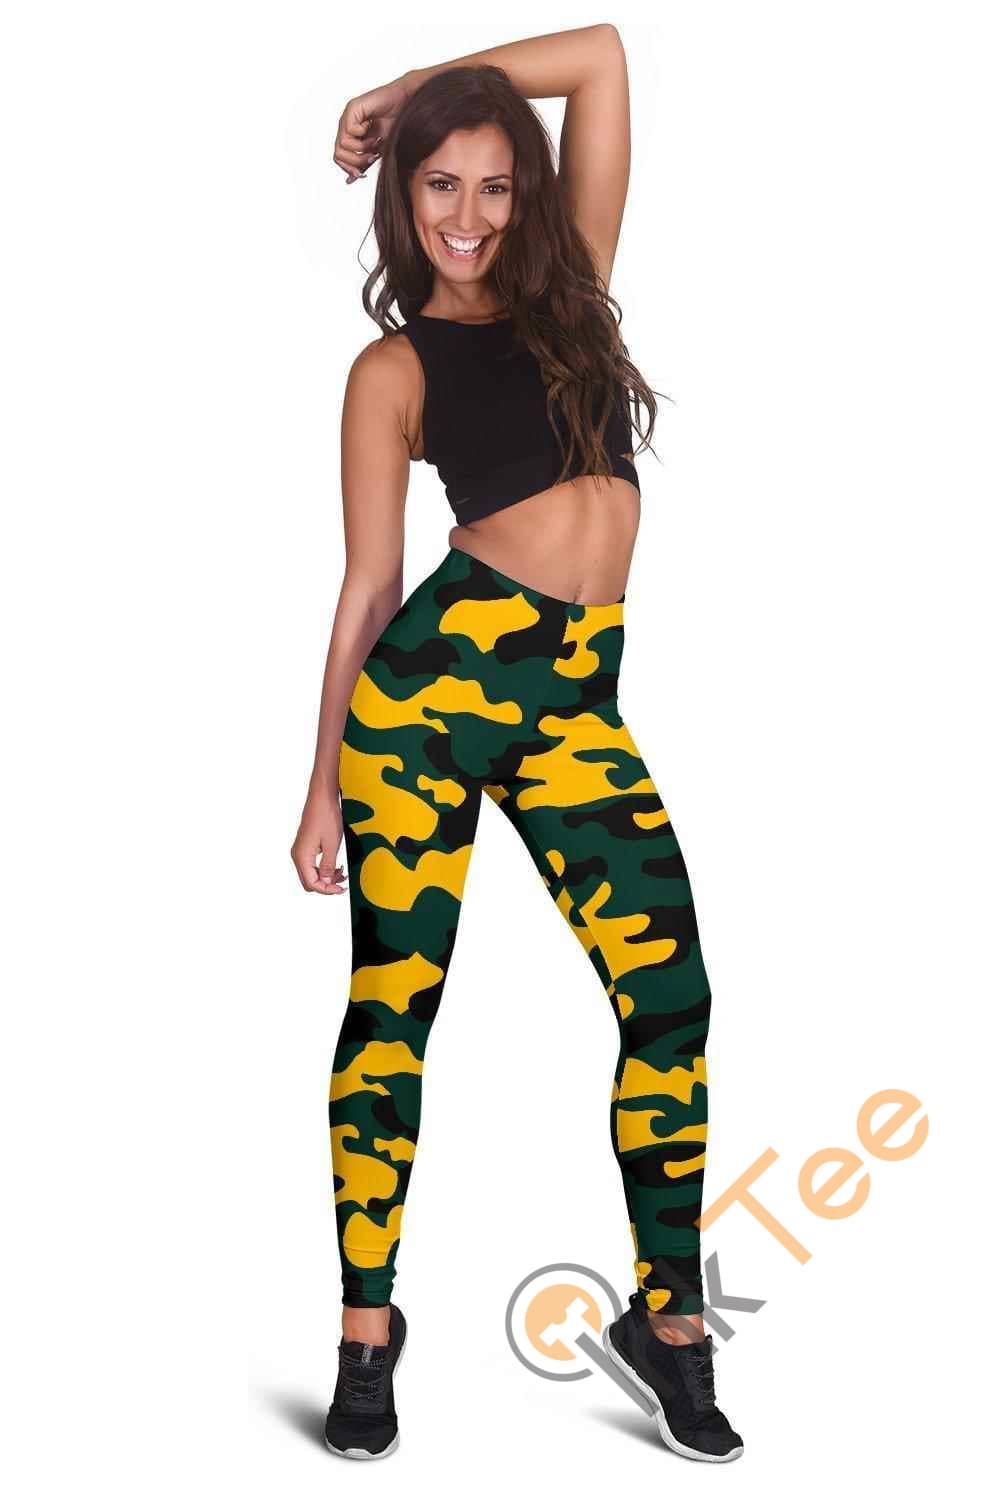 Inktee Store - Green Bay Packers Inspired Tru Camo 3D All Over Print For Yoga Fitness Fashion Women'S Leggings Image